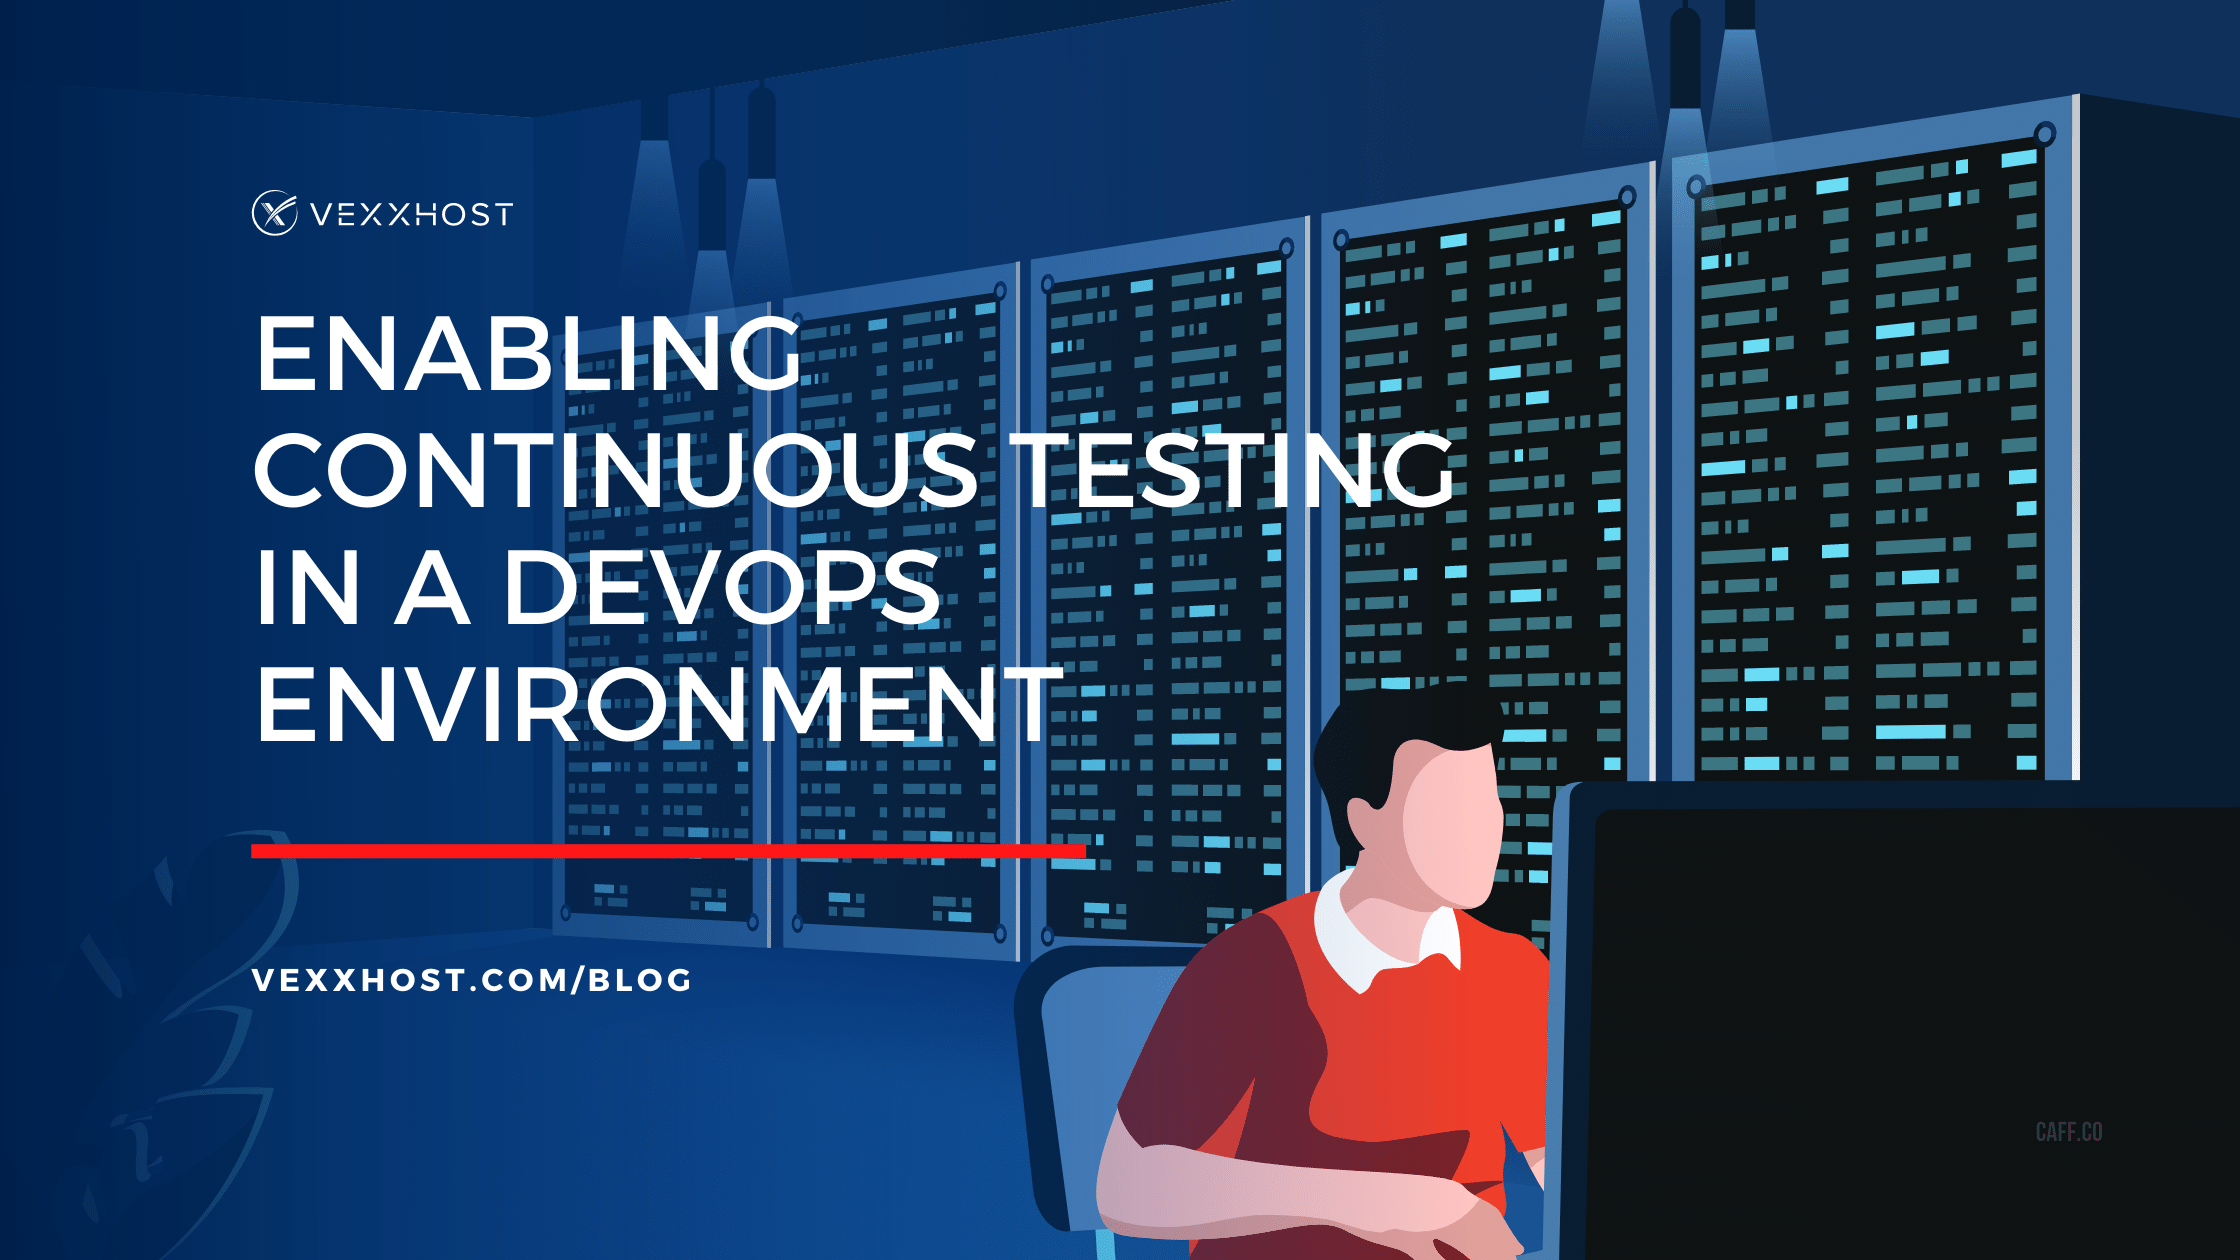 Enabling Continuous Testing in a DevOps Environment